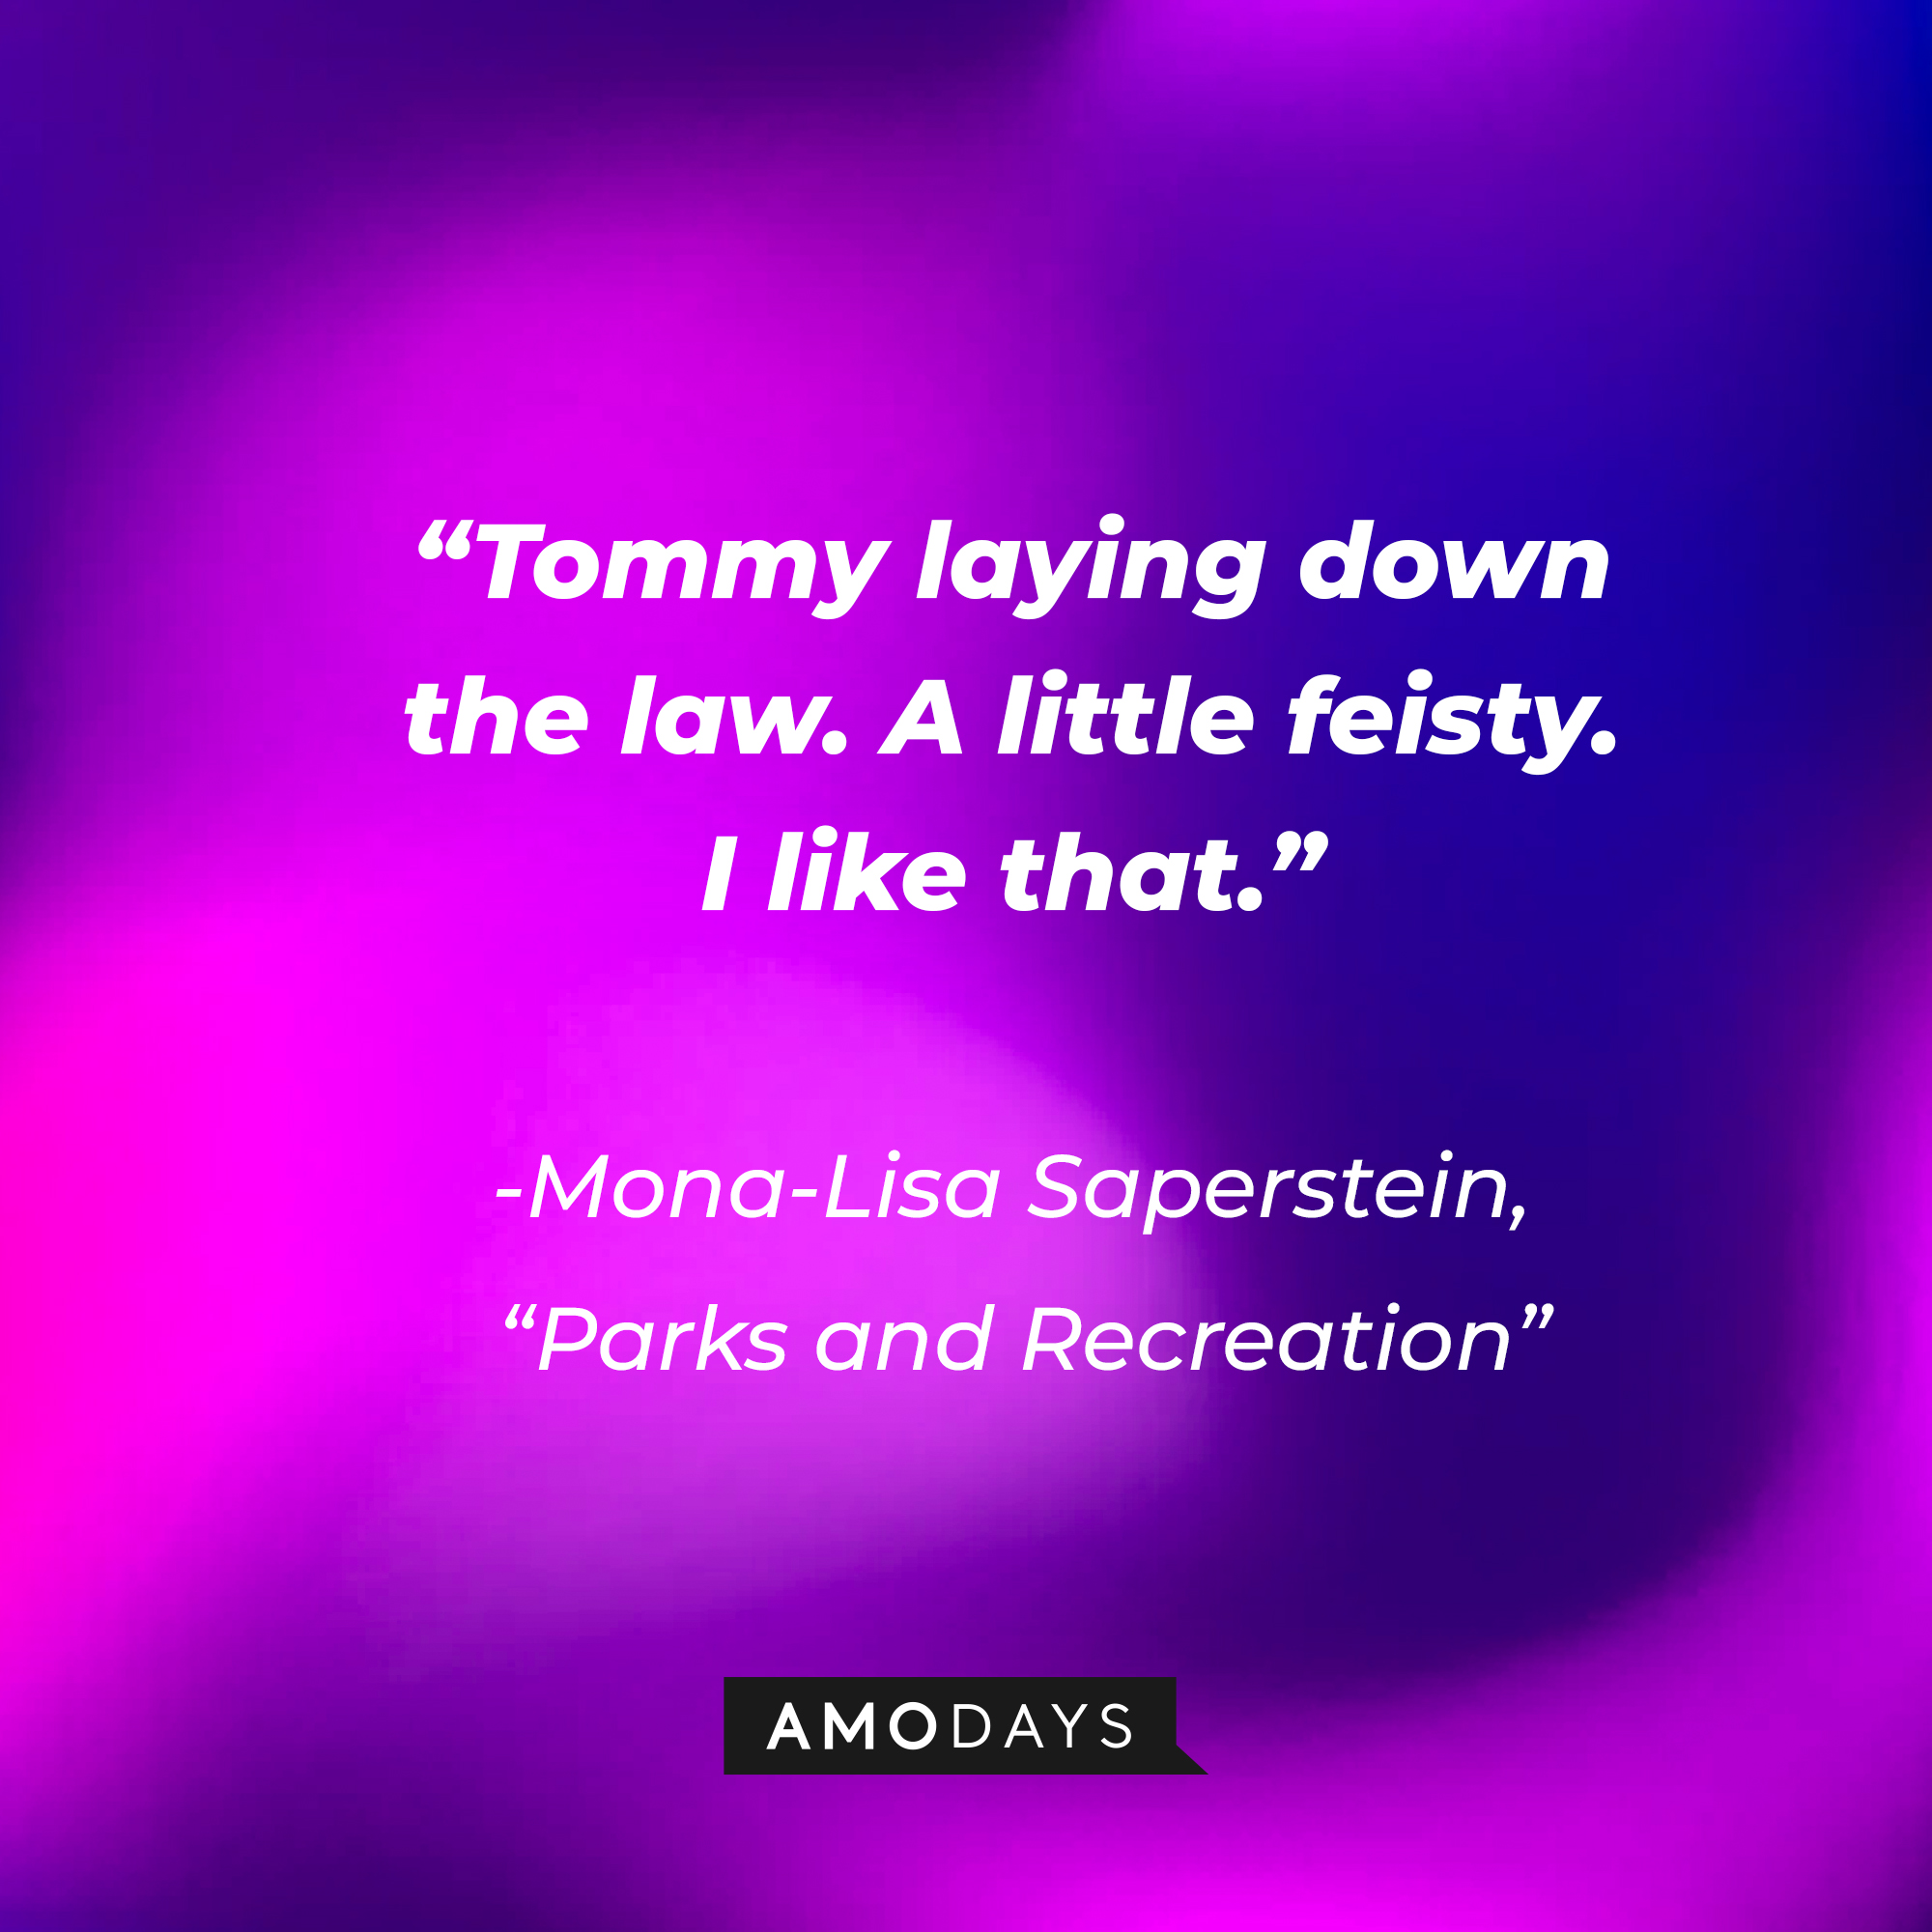 Mona-Lisa Saperstein's quote on "Parks and Recreation:" “Tommy laying down the law. A little feisty. I like that." | Source: AmoDays